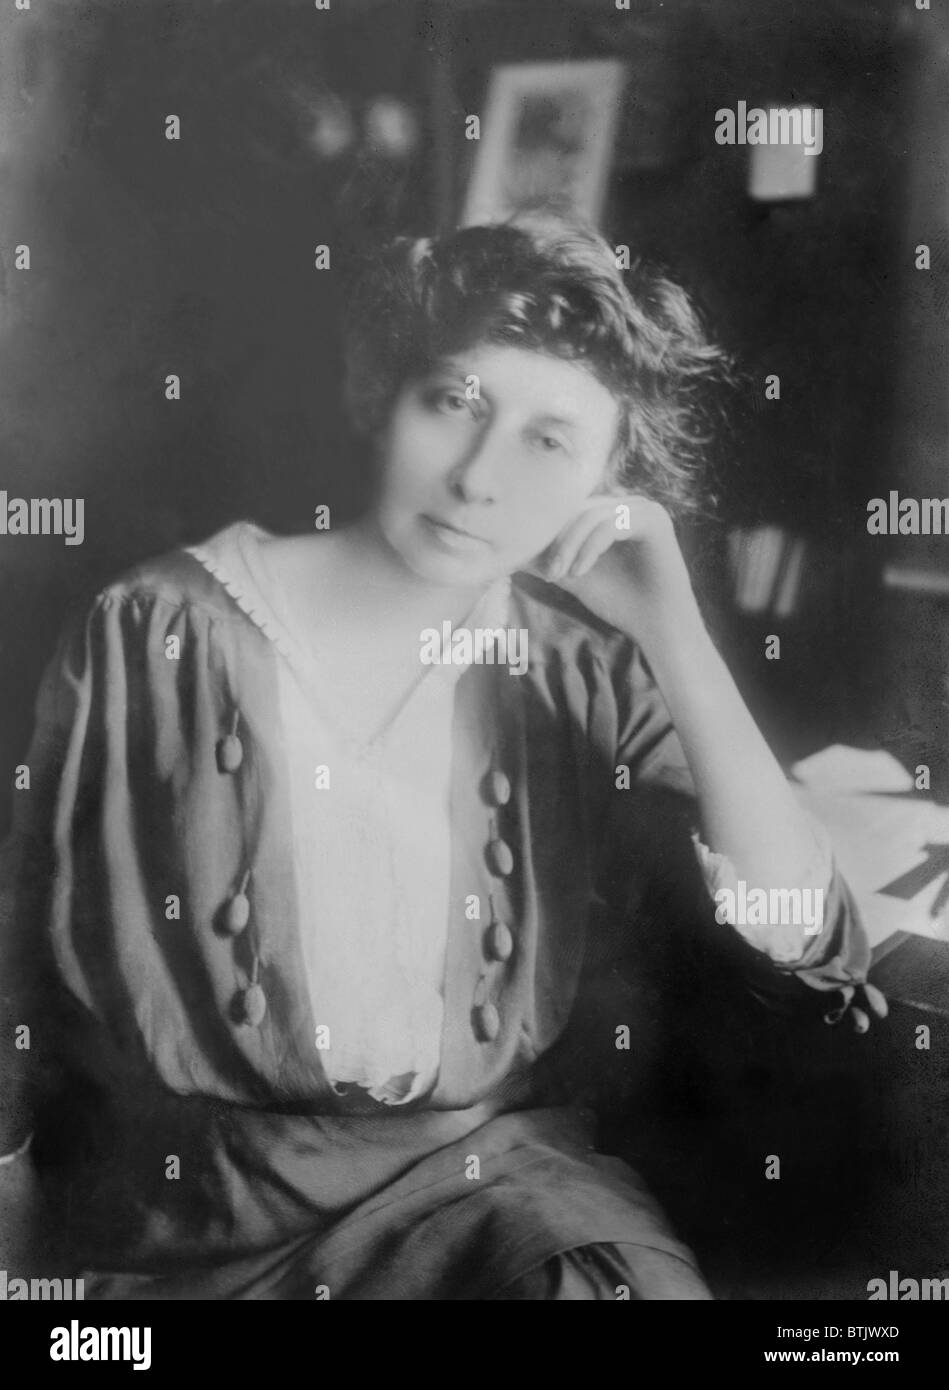 Rachel Crothers (1878-1958), a prolific and successful American playwright whose plays examined women's emotional lives through themes of marriage, divorce, Freudian psychology, and changing morals. Ca. 1930. Stock Photo